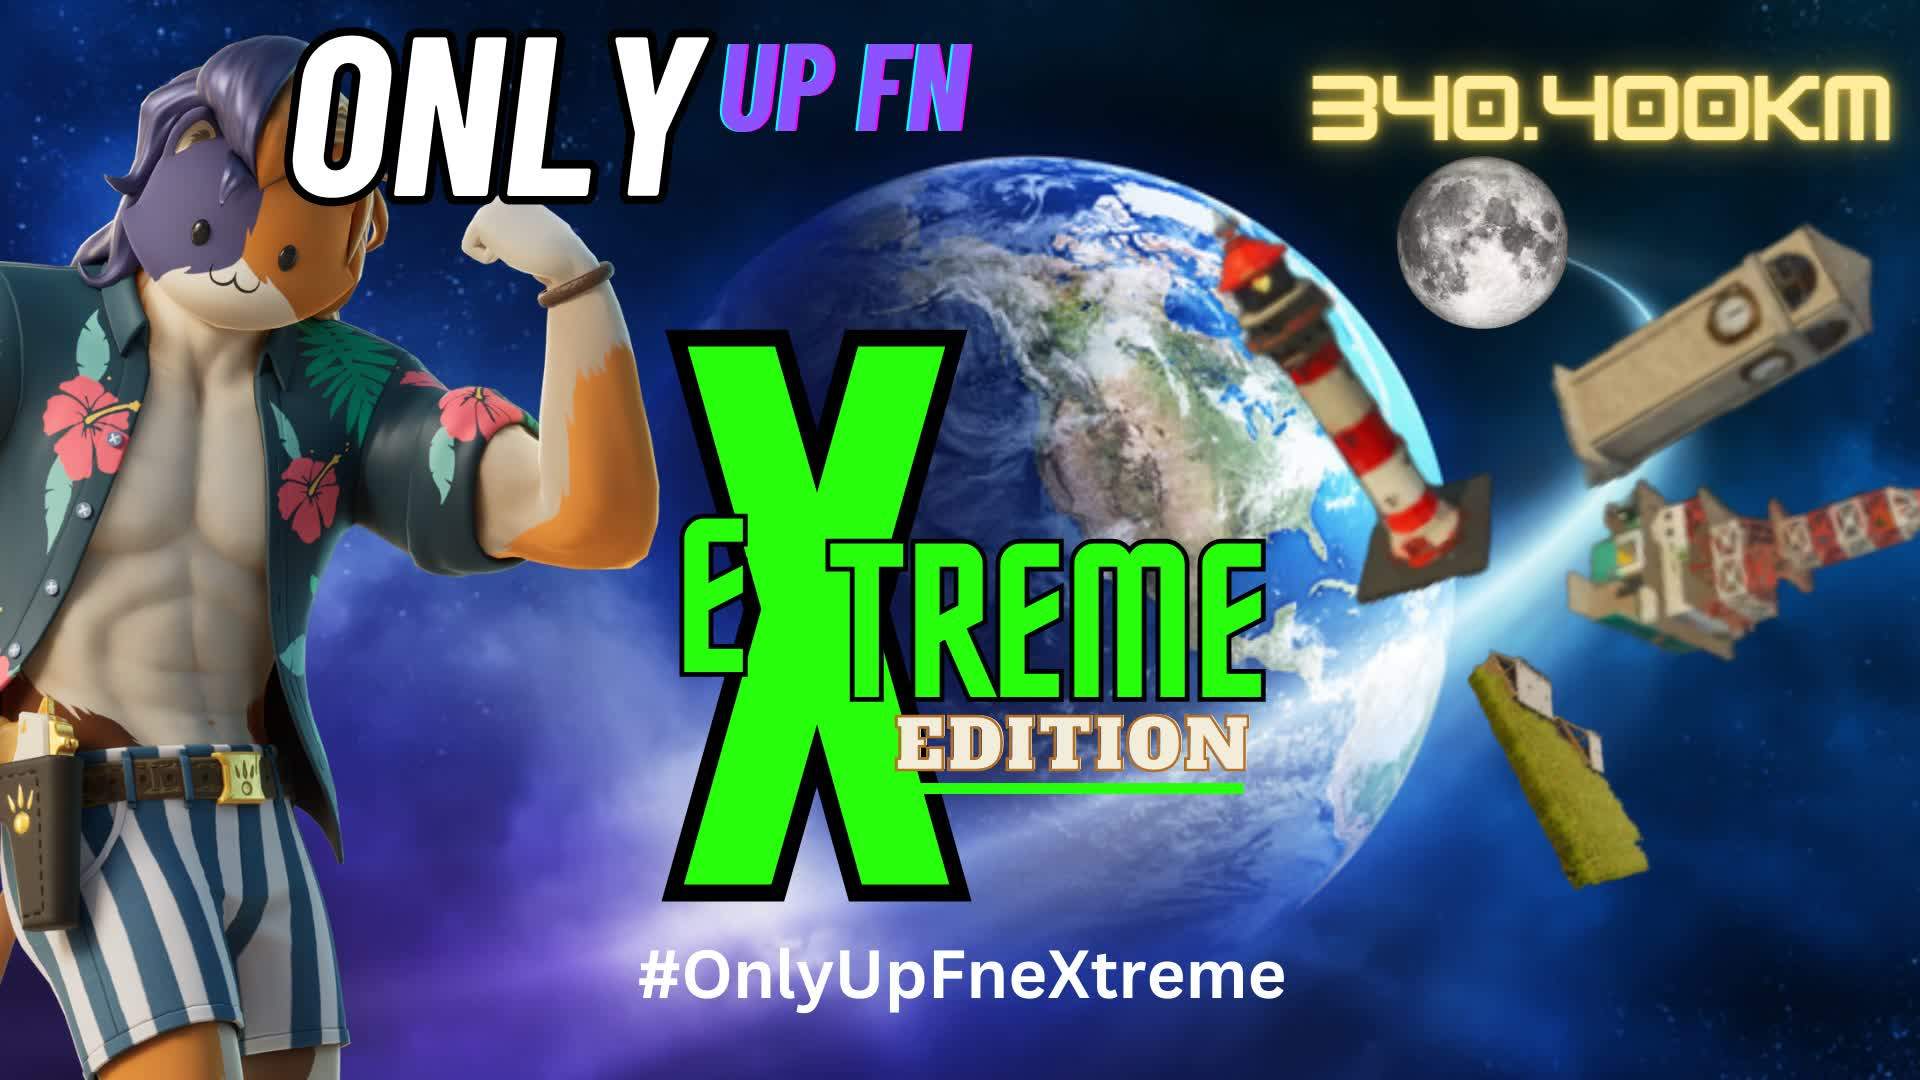 🧗‍♂️Only Up FN eXtreme Edition 🏆